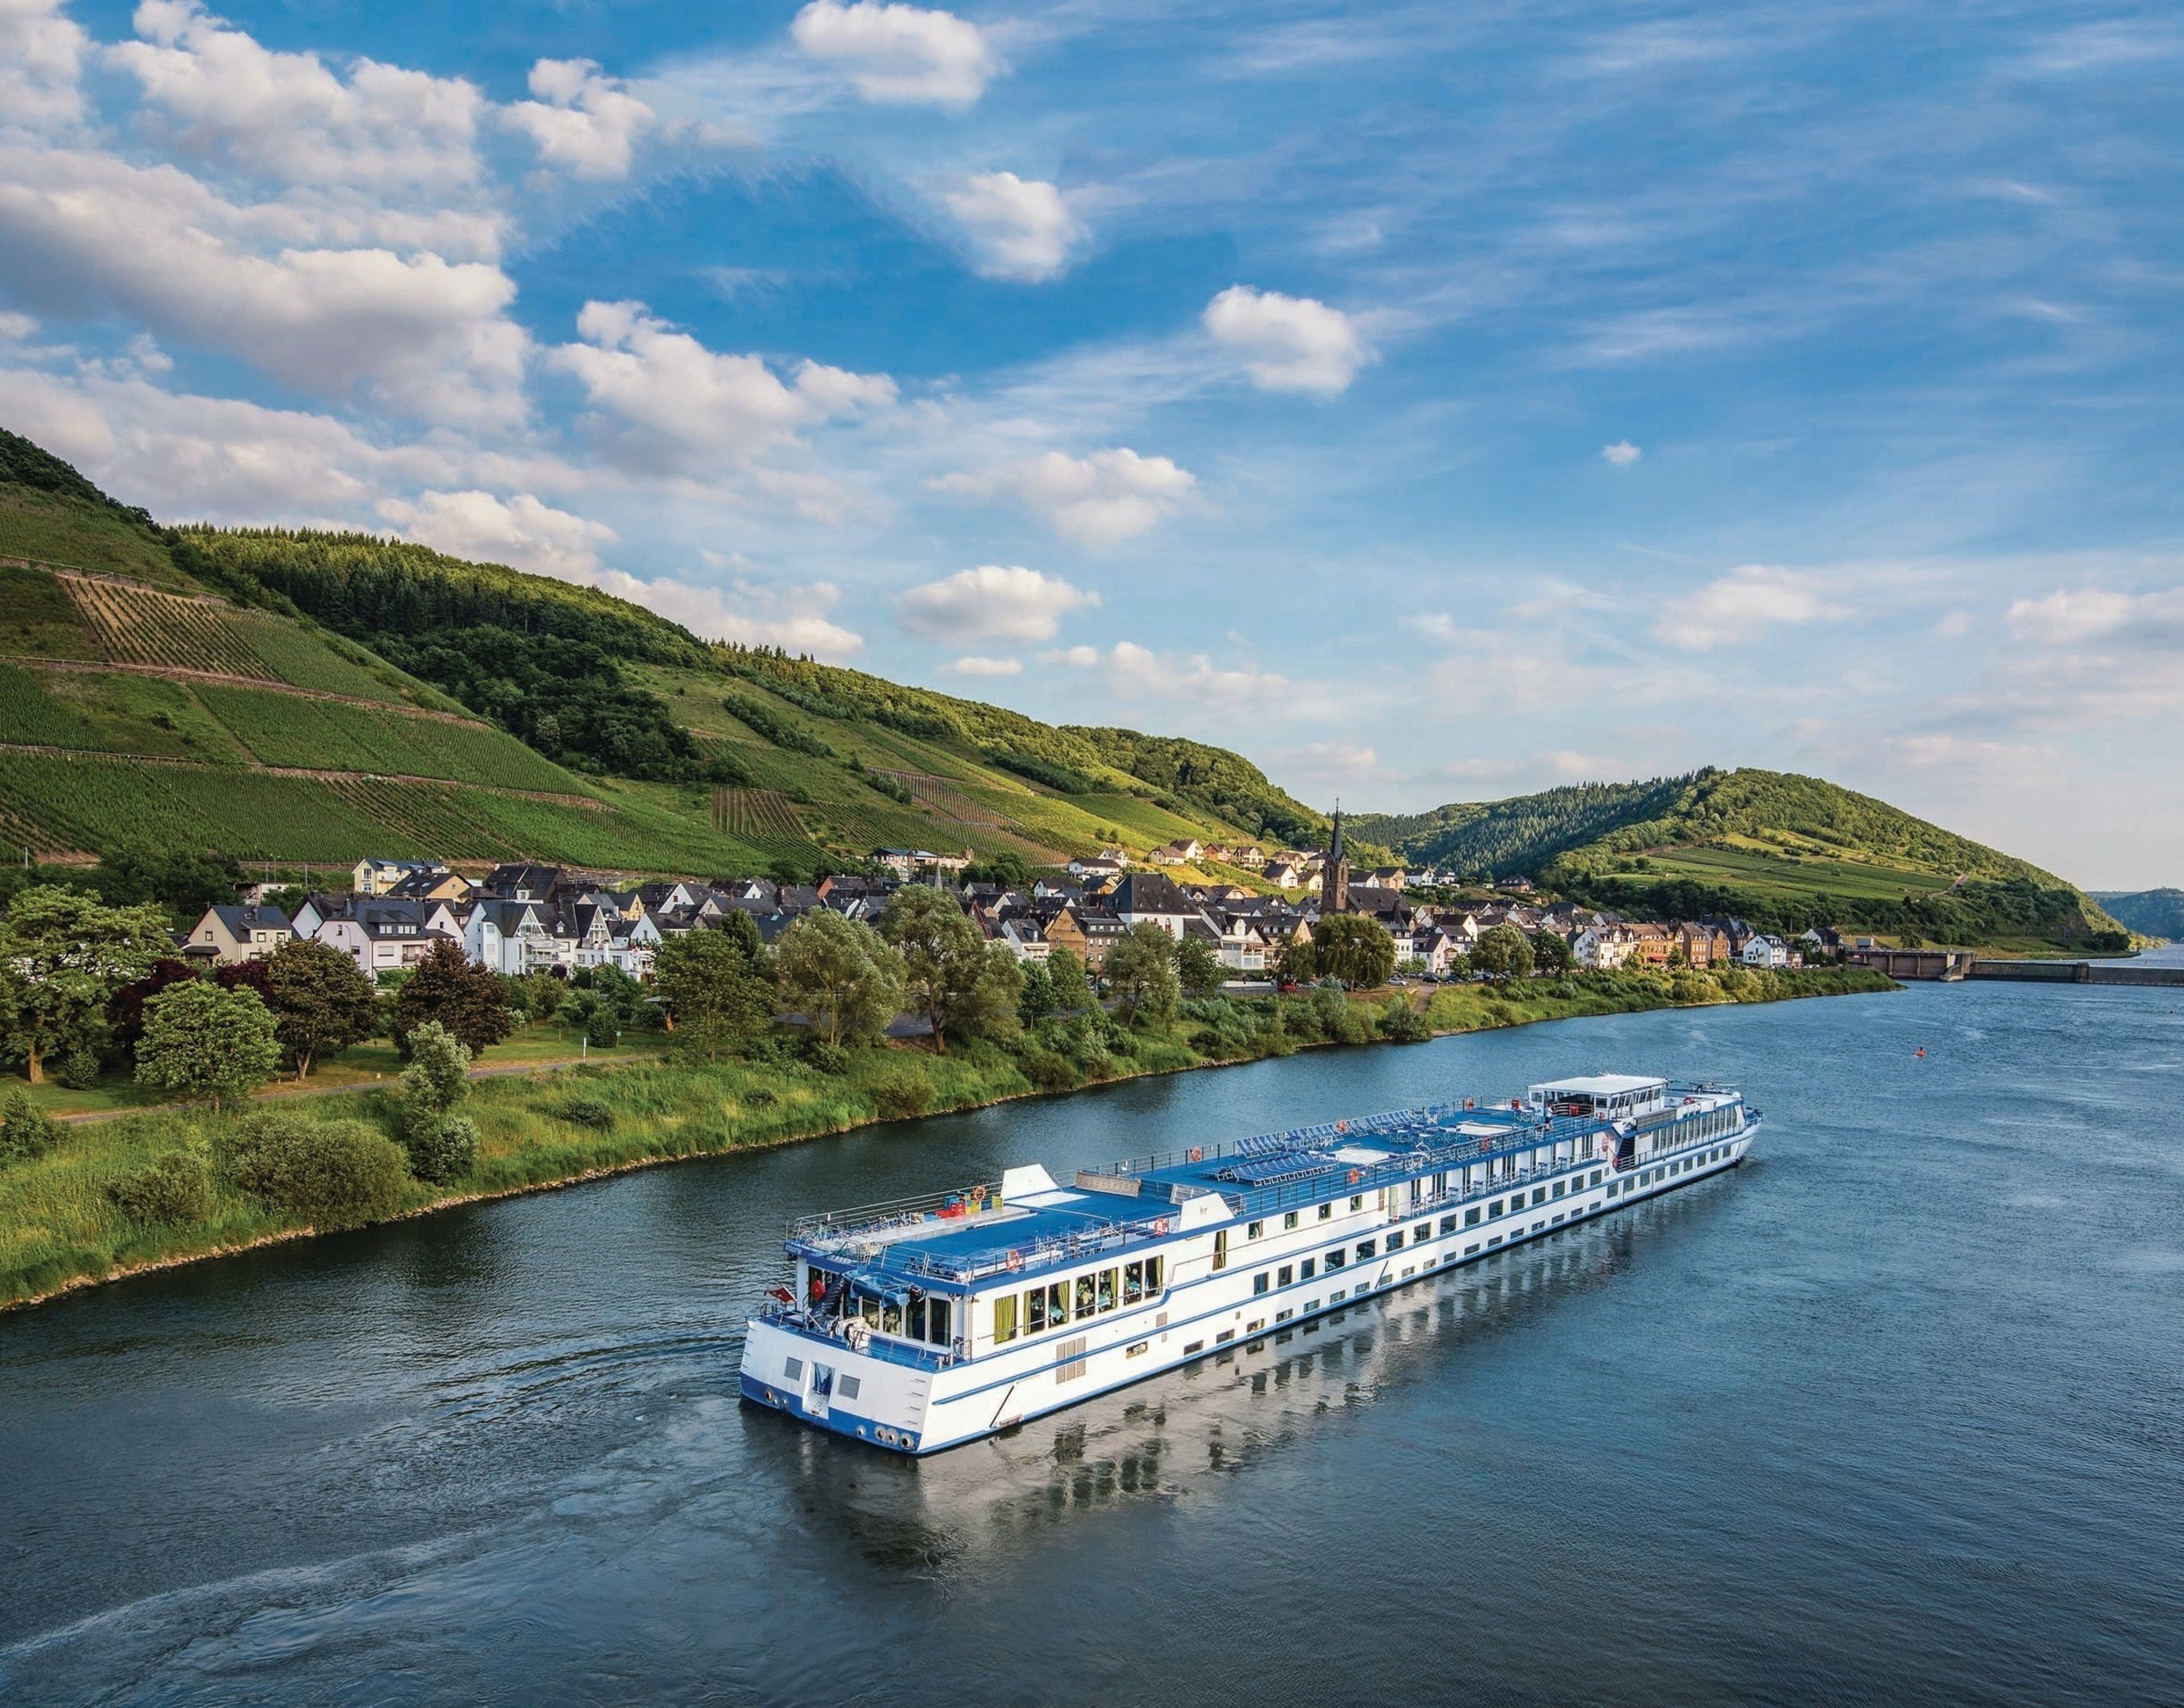 Grand Circle Cruise Line Named "World's Best River Cruise Line" in